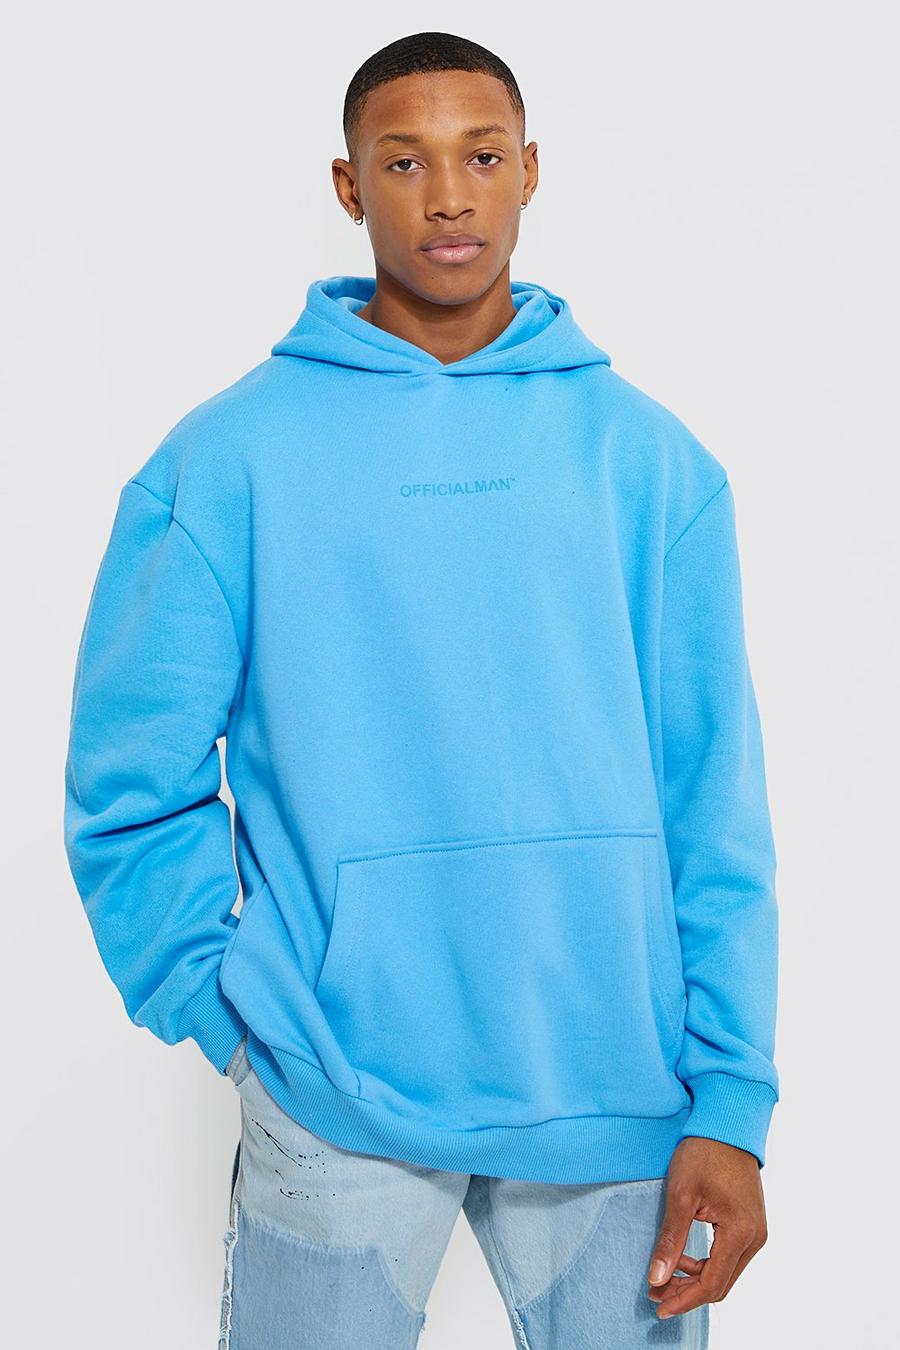 Blue Official Man Oversized Hoodie image number 1